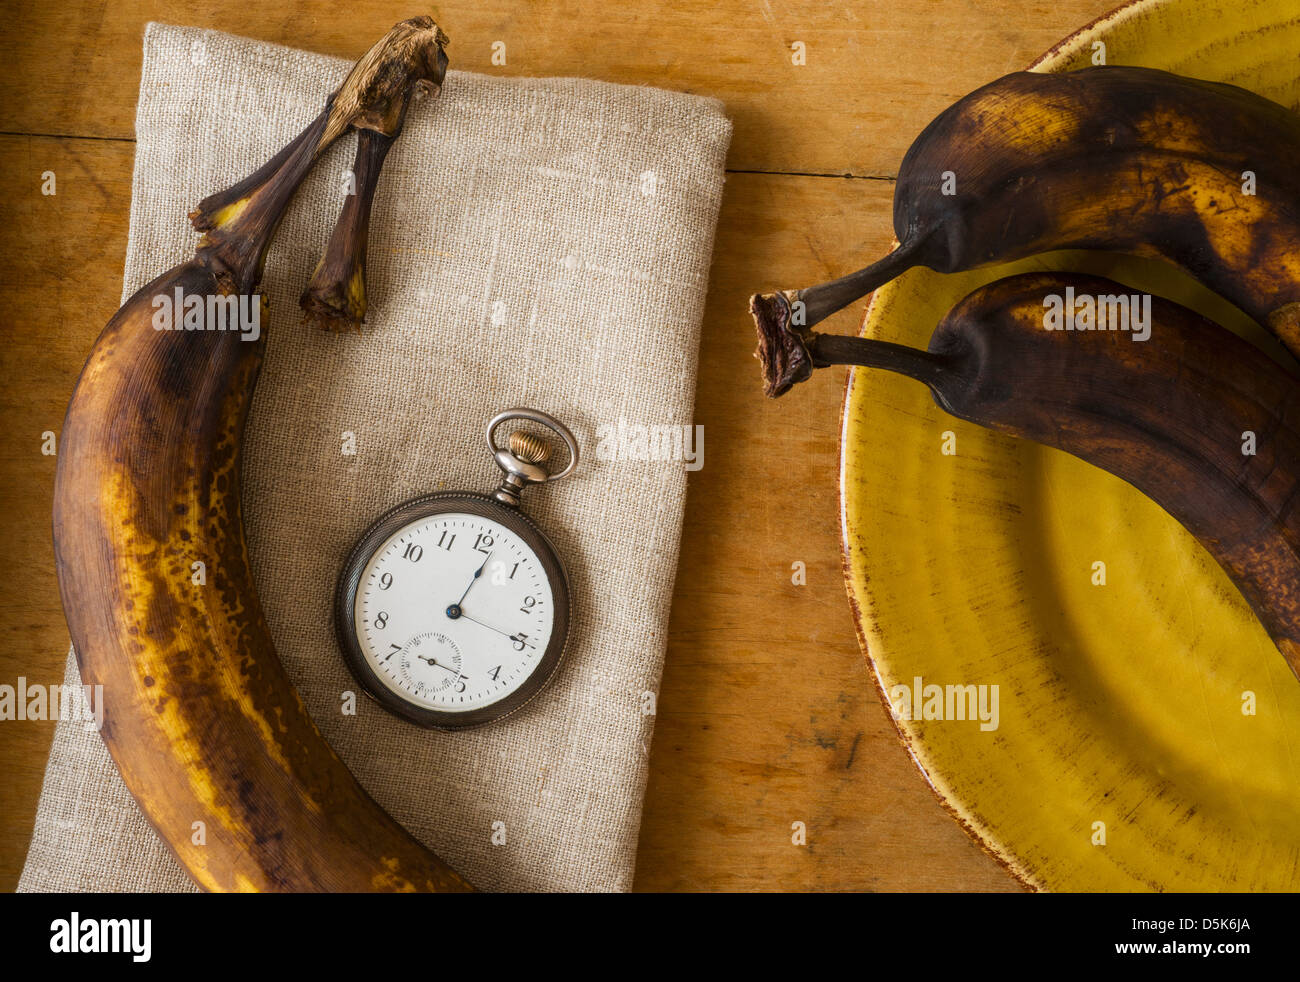 Still life with bananas and pocket watch Stock Photo